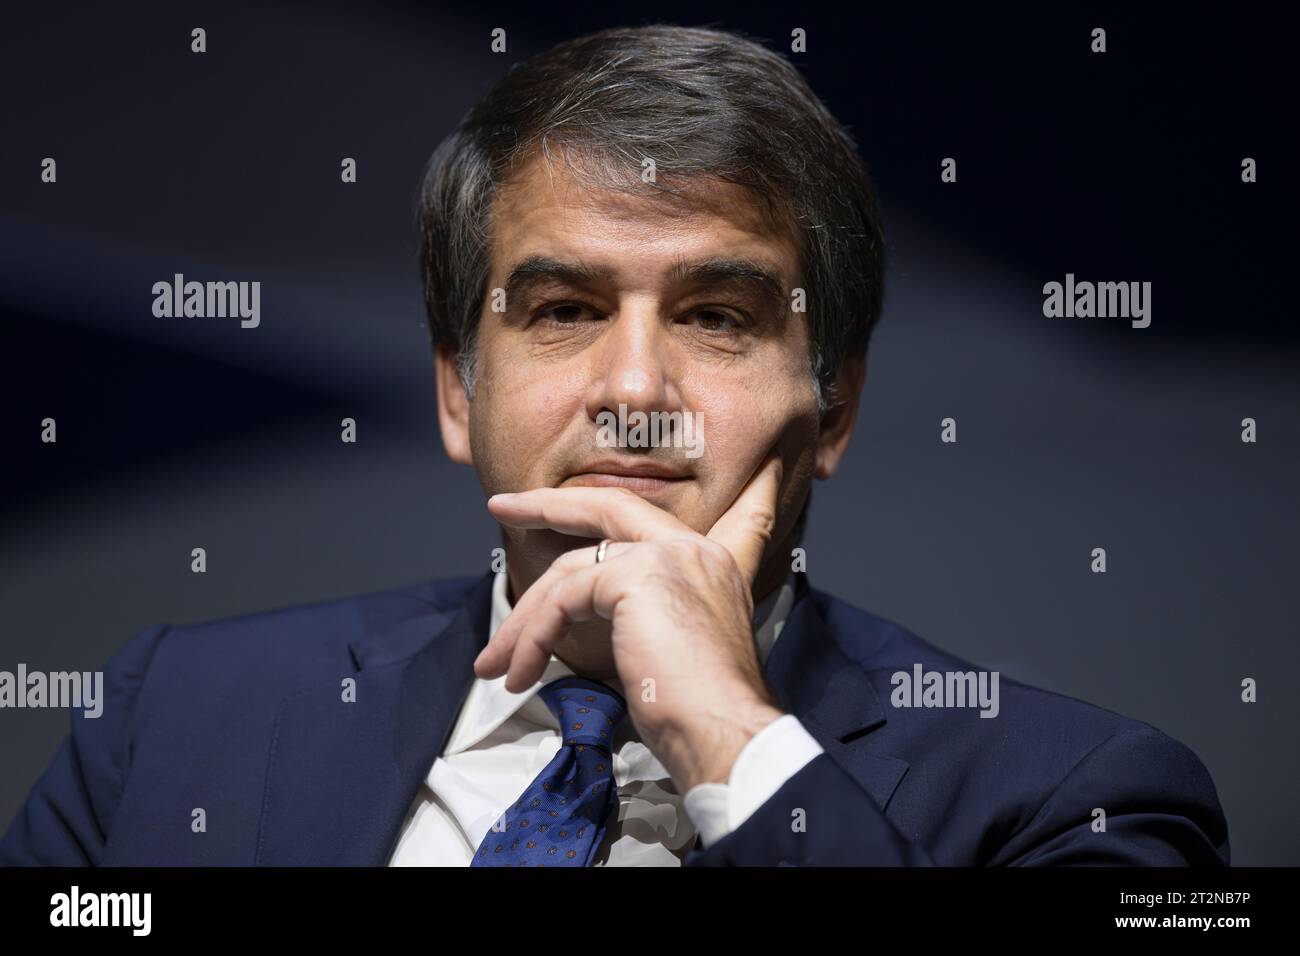 Turin, Italy. 20 October 2023. Raffaele Fitto, Italian minister of European affairs, looks on during the national congress of accountants and accounting experts 'Lavoriamo insieme per il nostro futuro' (Let's work together for our future). Credit: Nicolò Campo/Alamy Live News Stock Photo